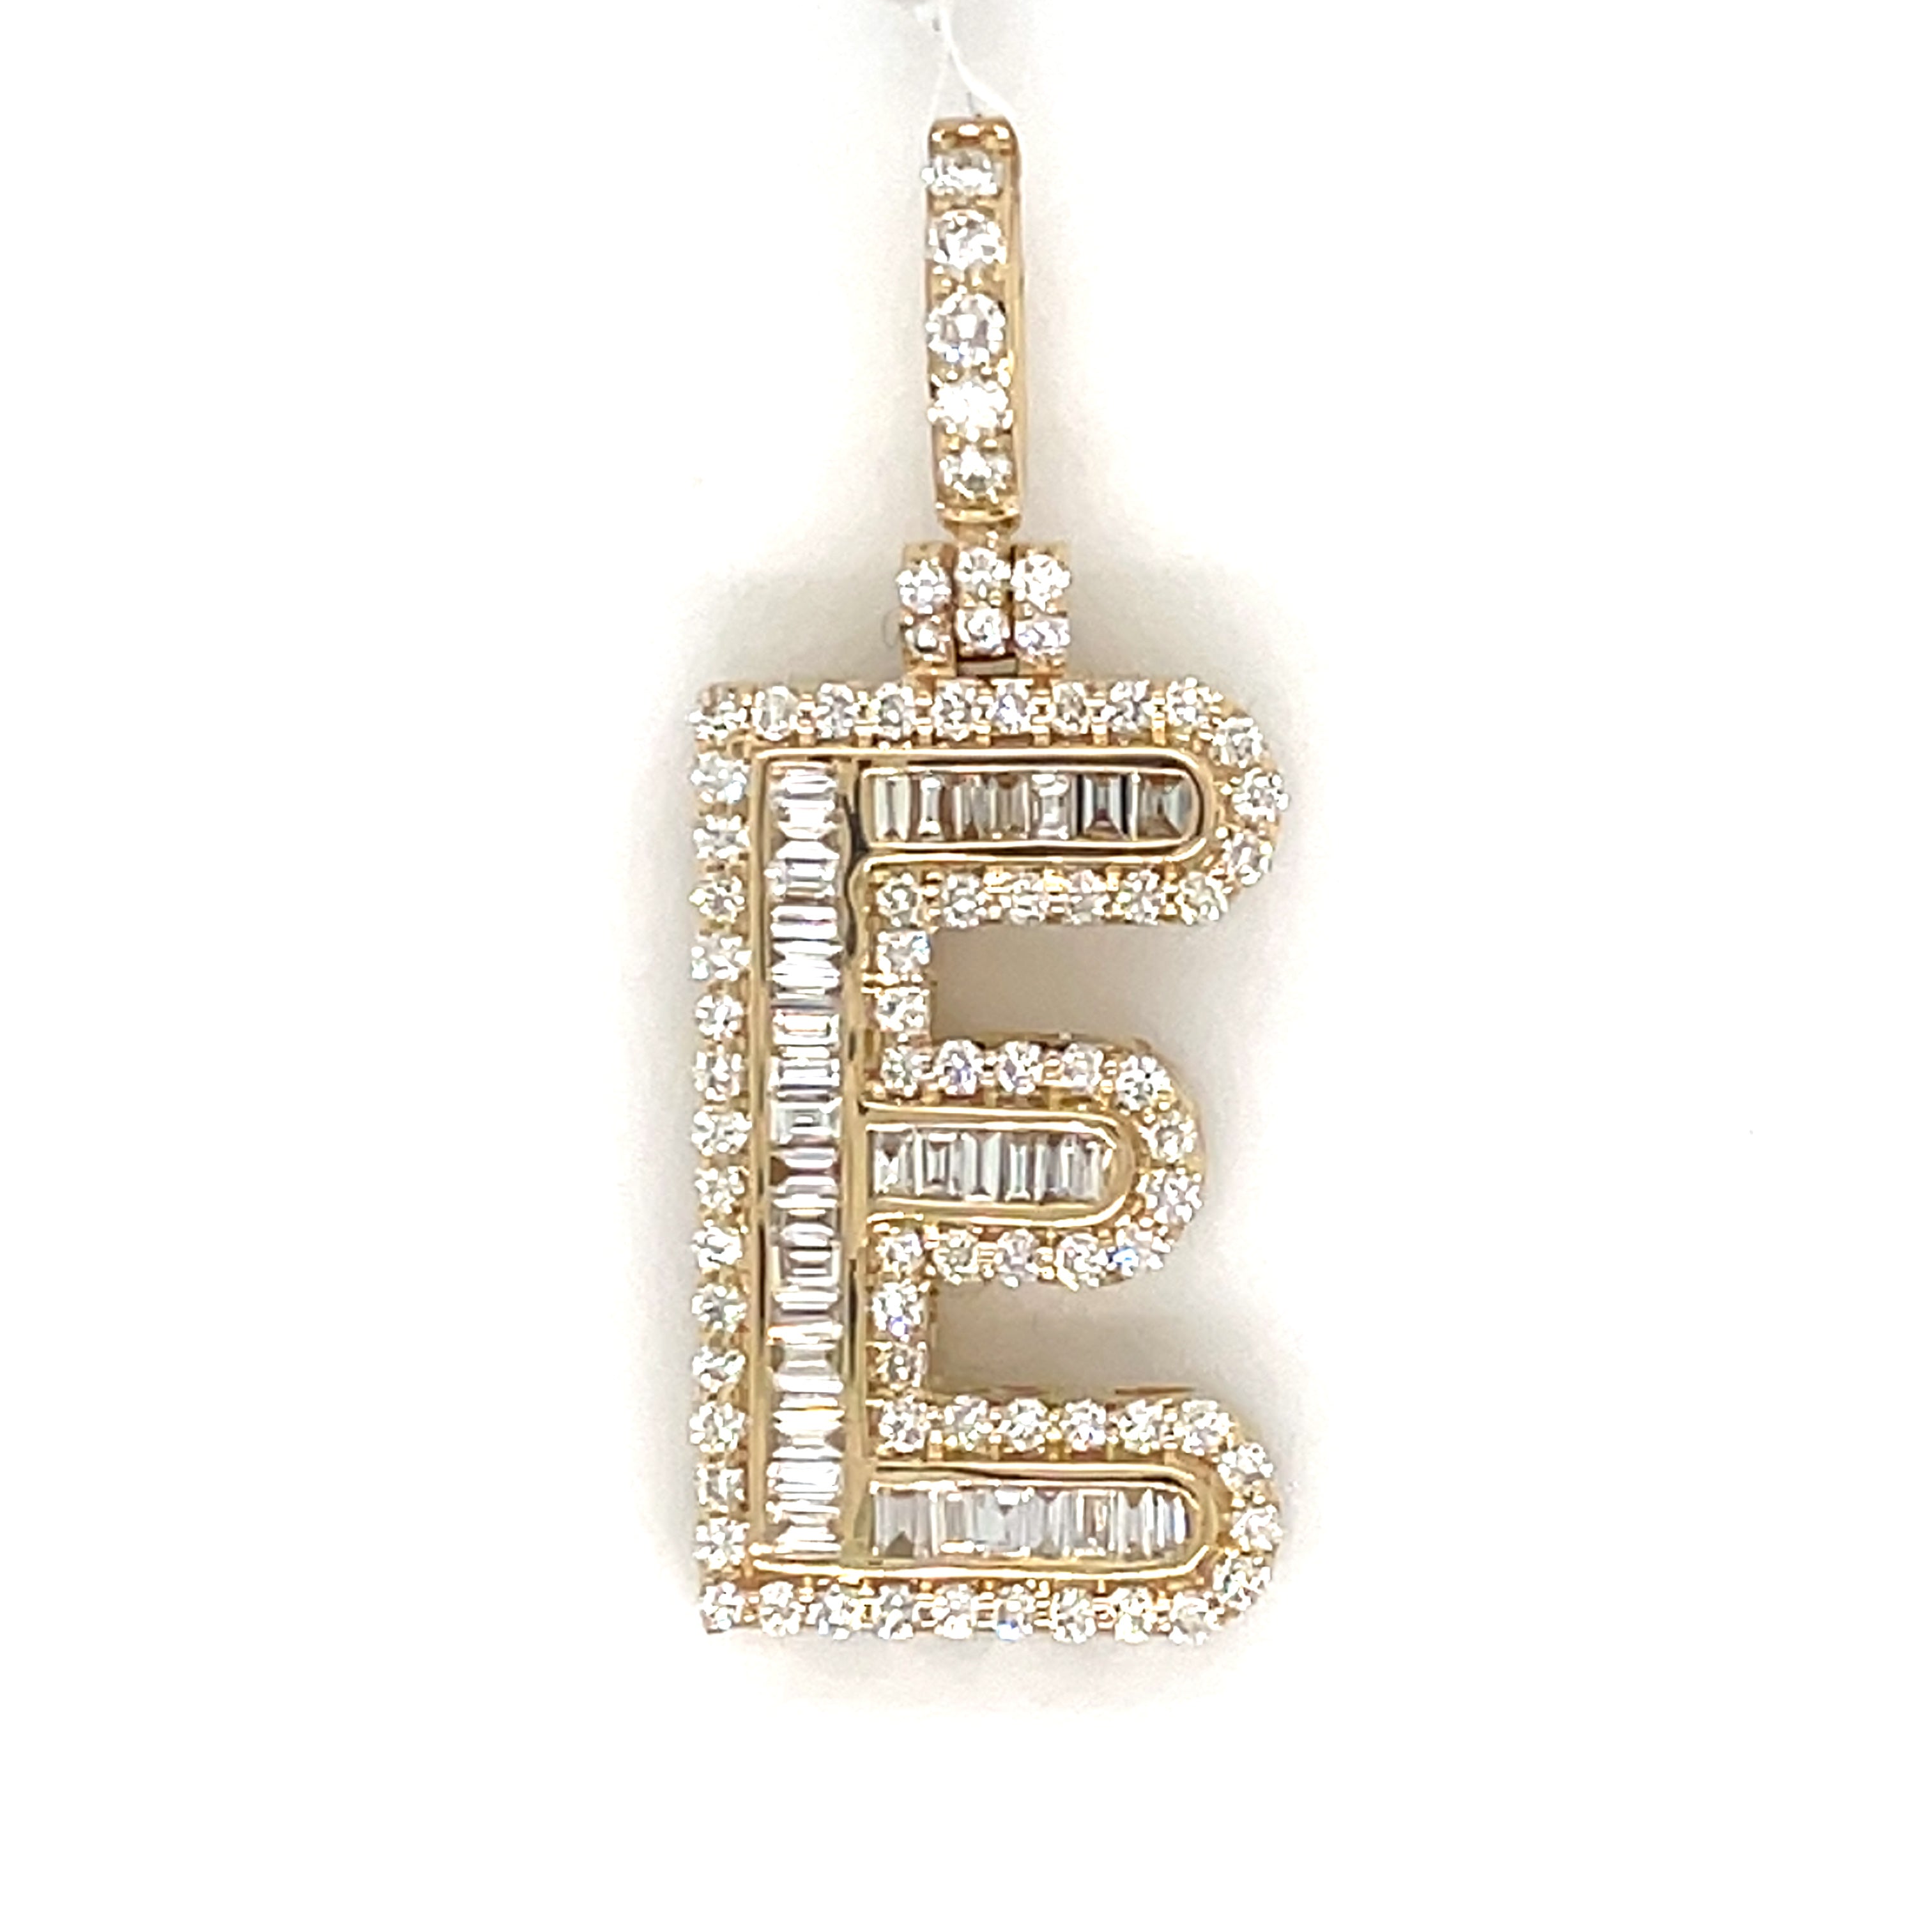 1.00 CT. Diamond ANY INTIAL Baguette Pendant in 10K Gold - White Carat Diamonds 